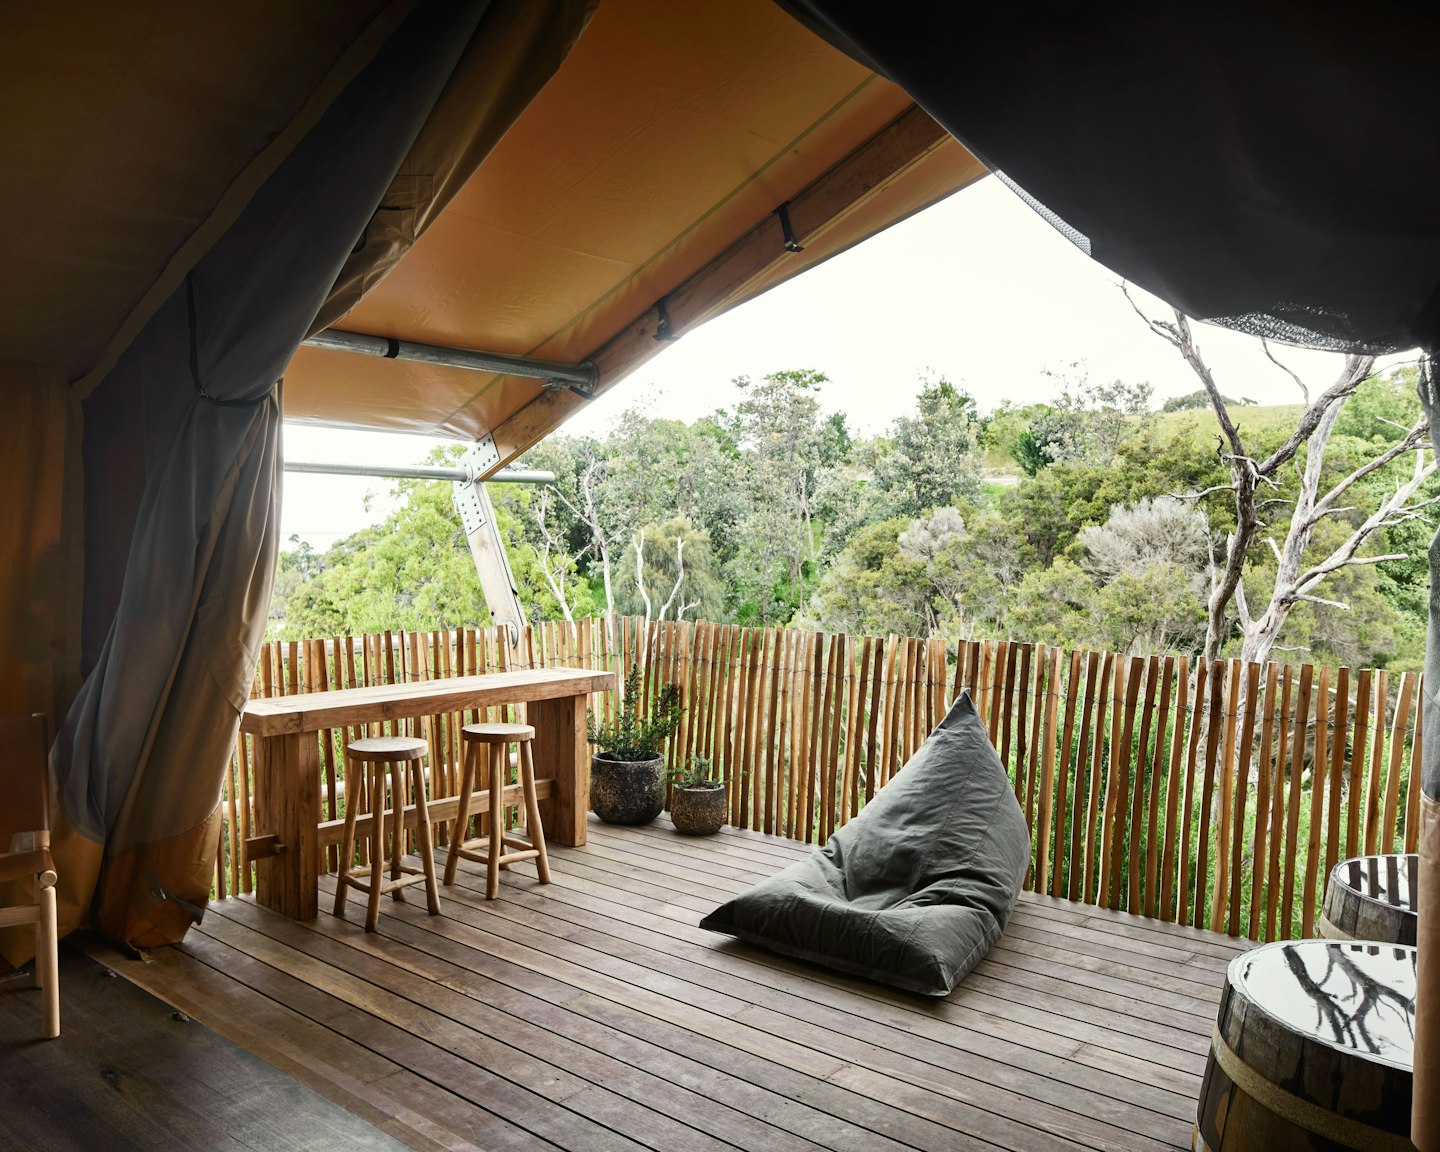 hillside glamping deck and private barrels